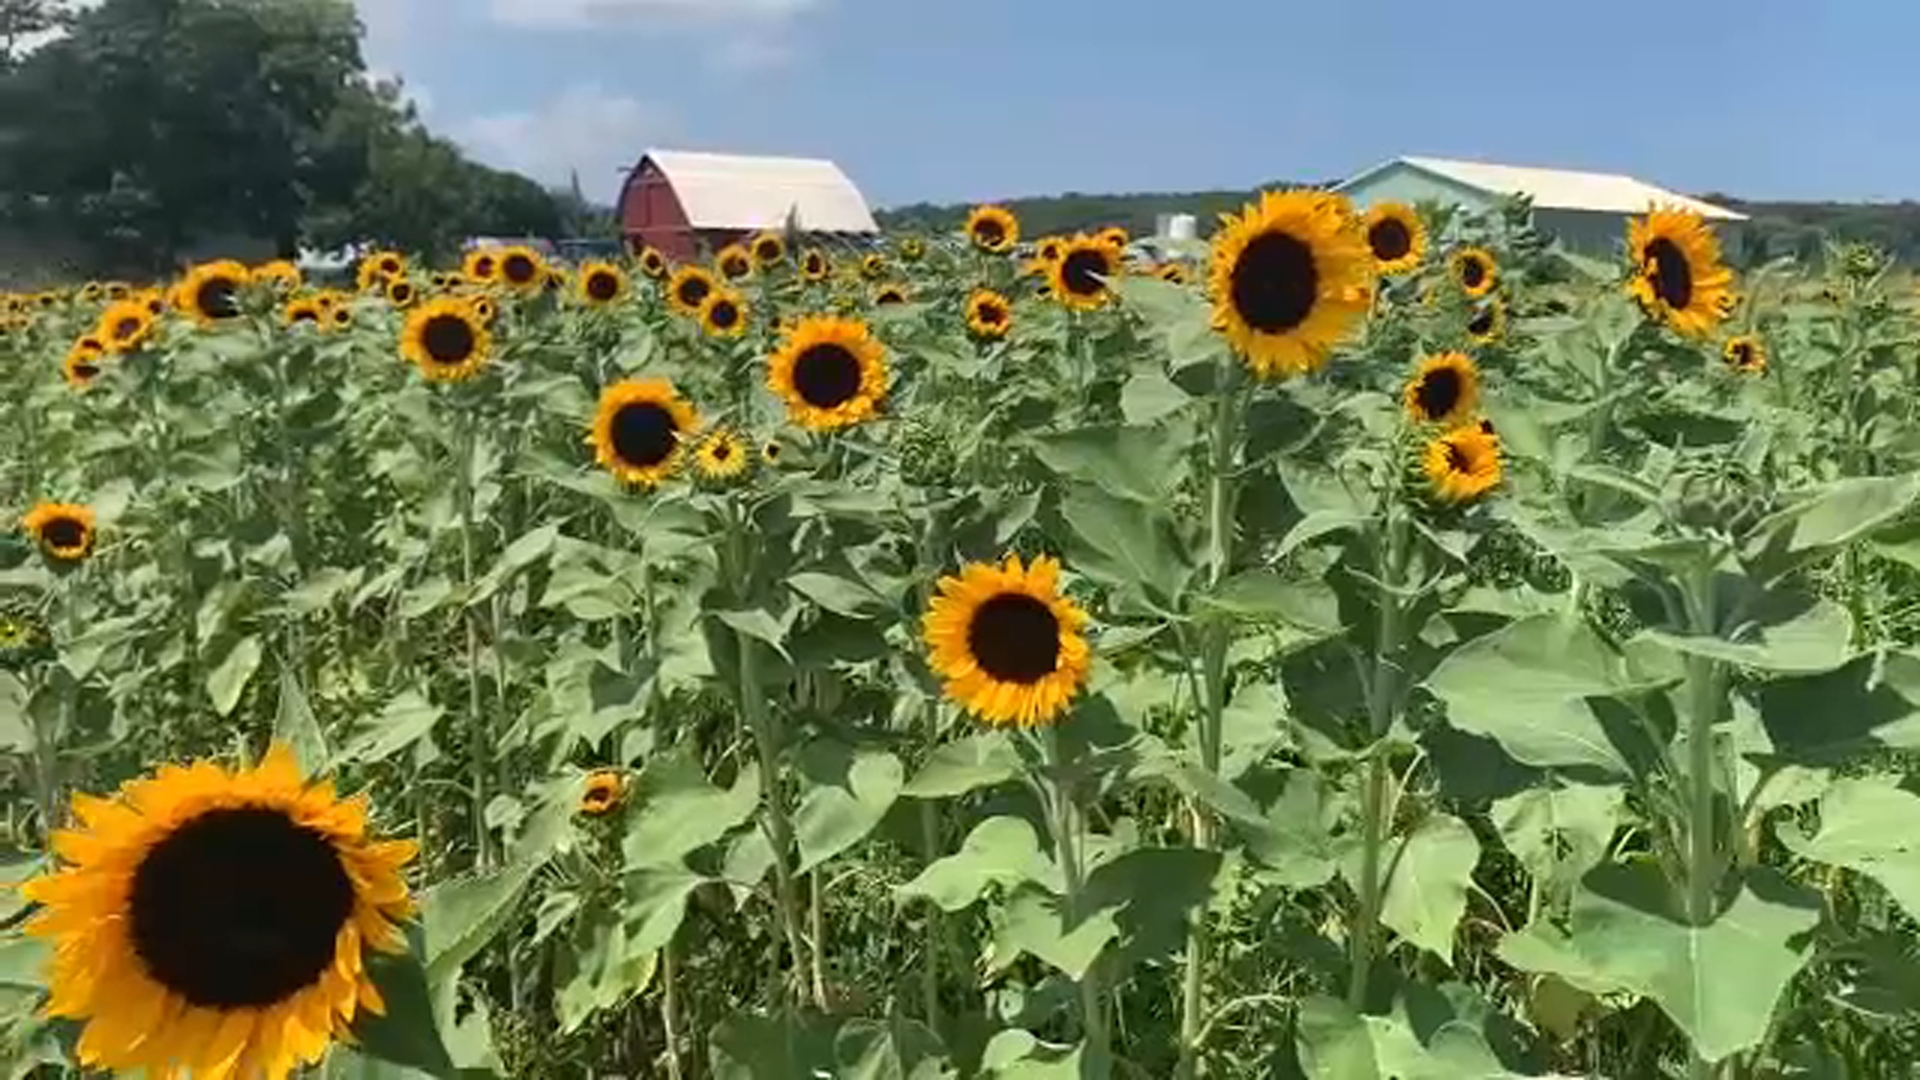 garden of eve farm grows thousands of sunflowers for you to pick at